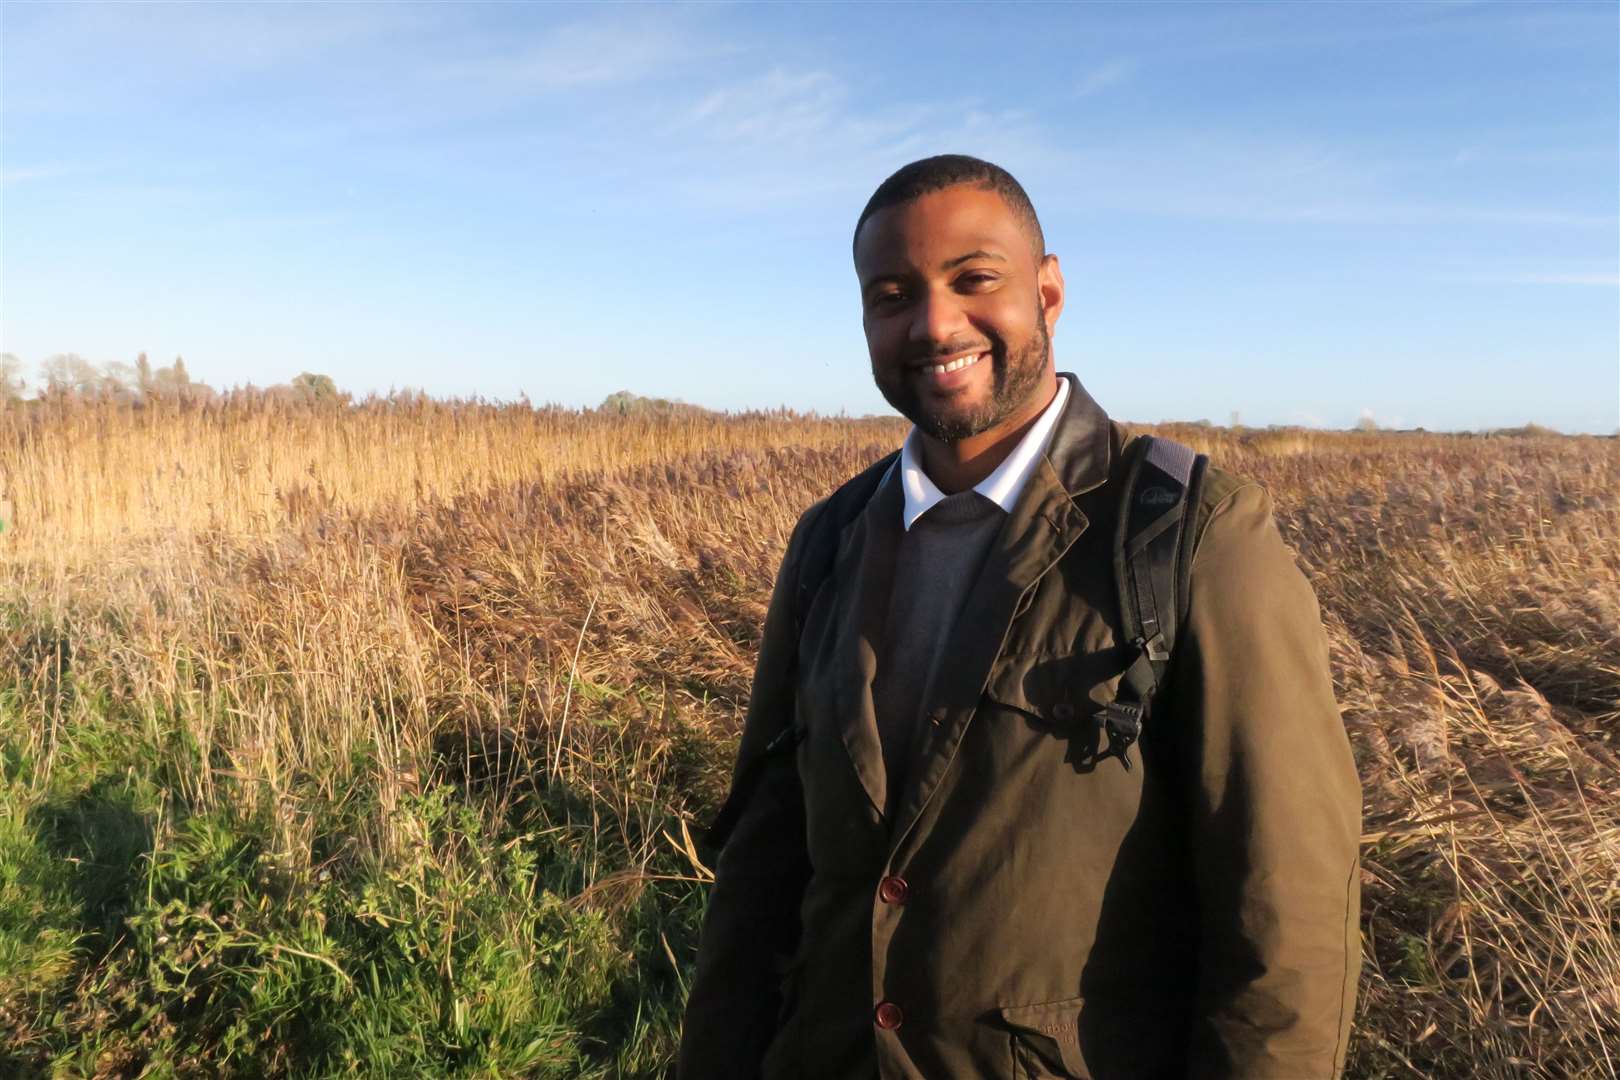 JB Gill now lives and runs a farm in Kent with his wife and children